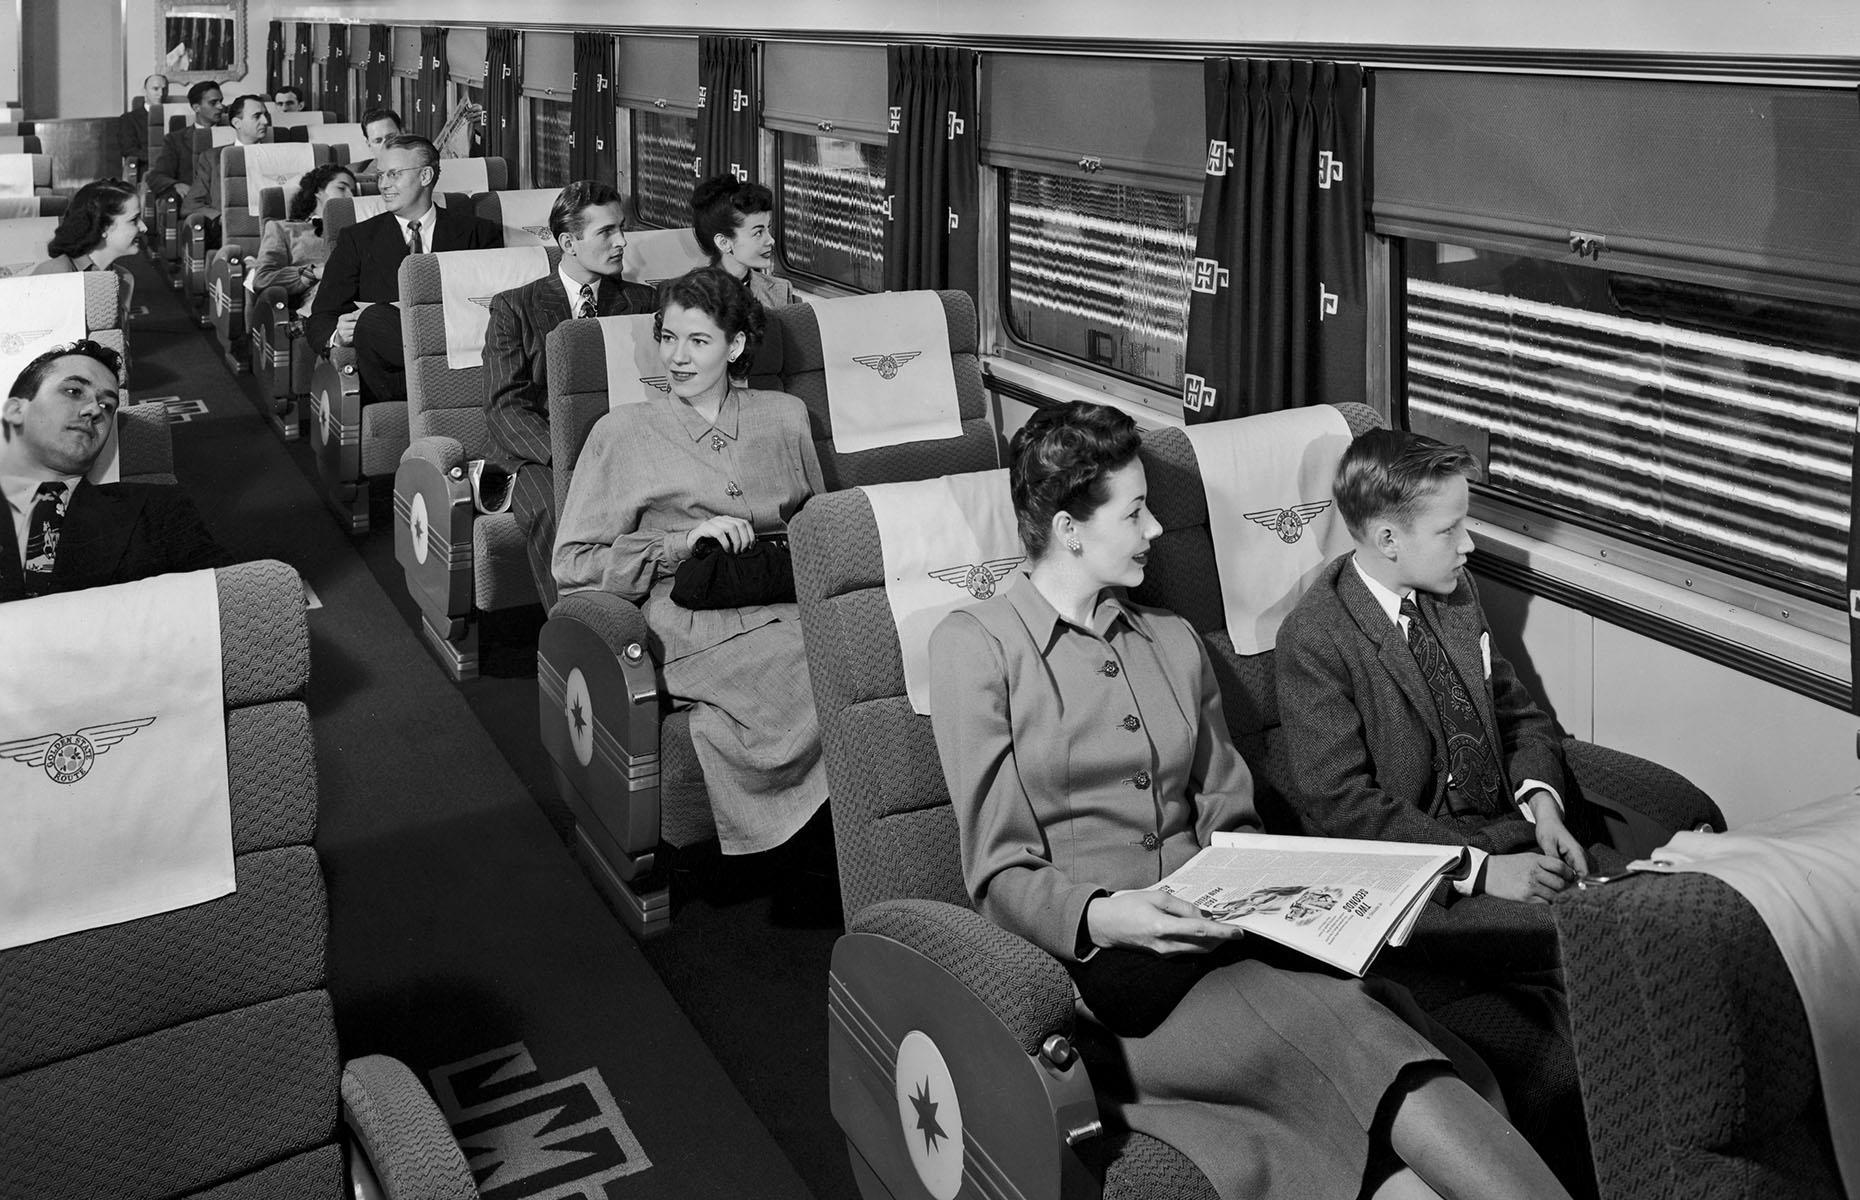 Introduced in November 1939, Rocky Mountain Rocket was one of the six streamlined trains travelling between Chicago and Denver. As competition along that route was stiff, the Rocket offered its passengers total comfort during the 13-hour trip. The train had a 32-patron diner and 14-patron cocktail lounge cars, two sleeping cars and a sleeper-observation car as well as coaches with wide and cushioned reclining seats.